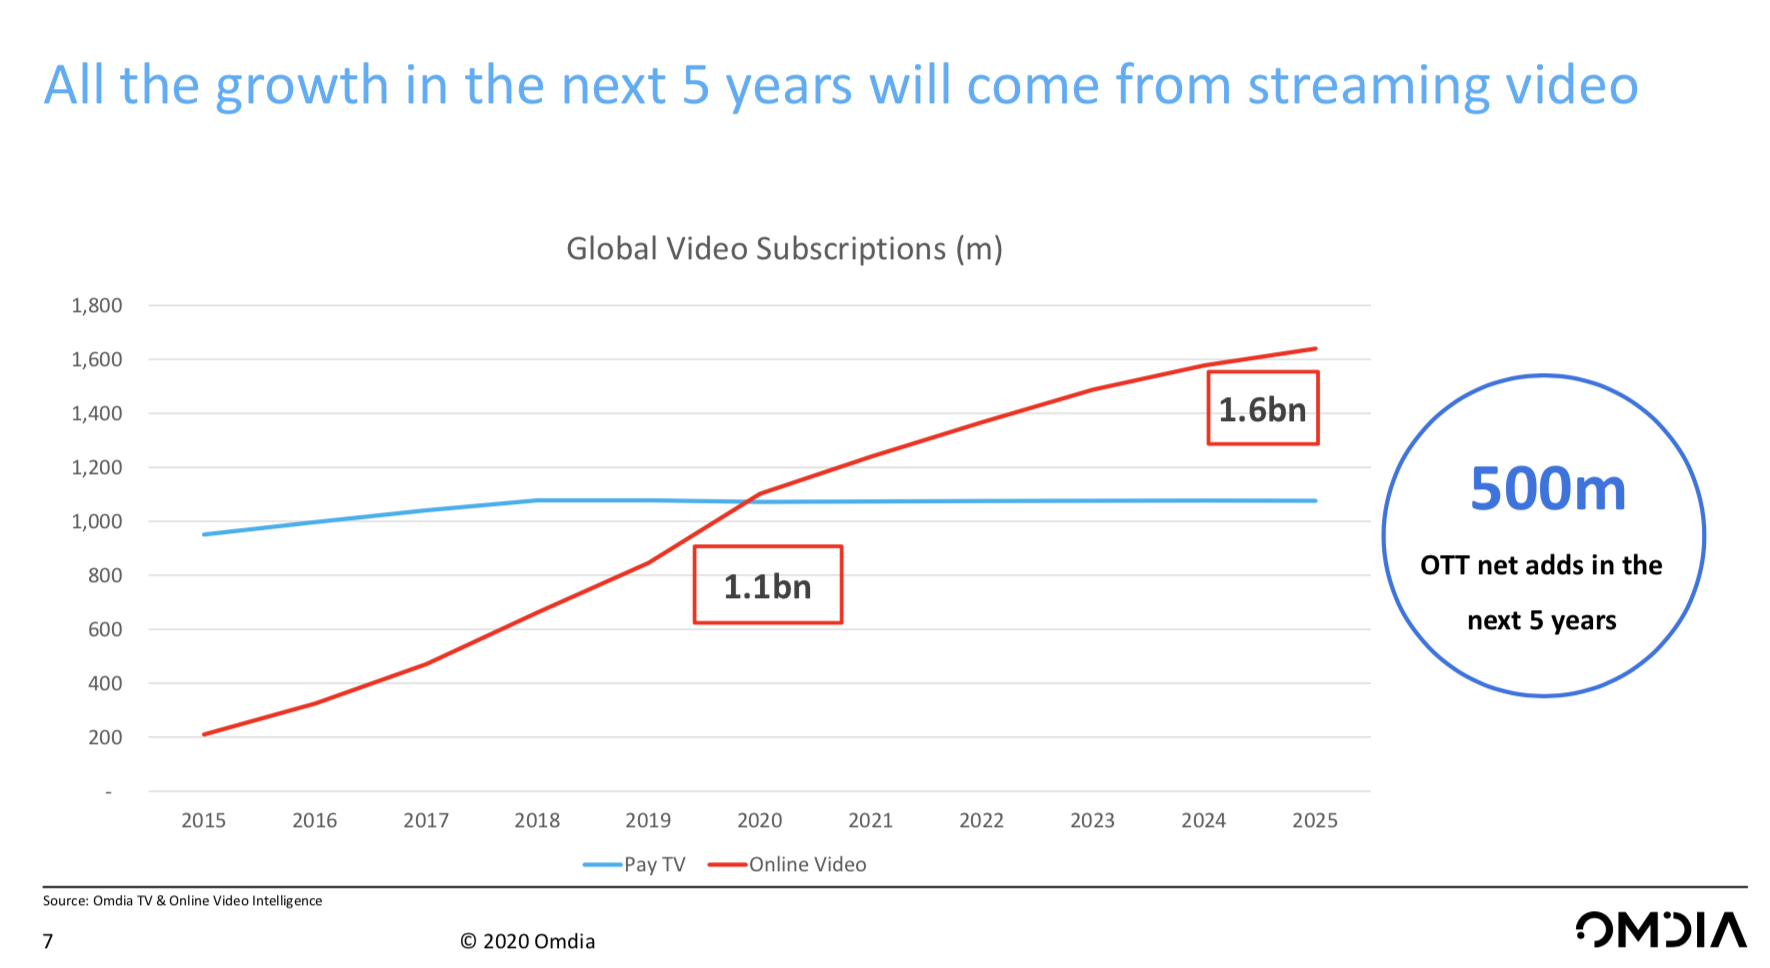 The Rise of Streaming and its Effect on Television